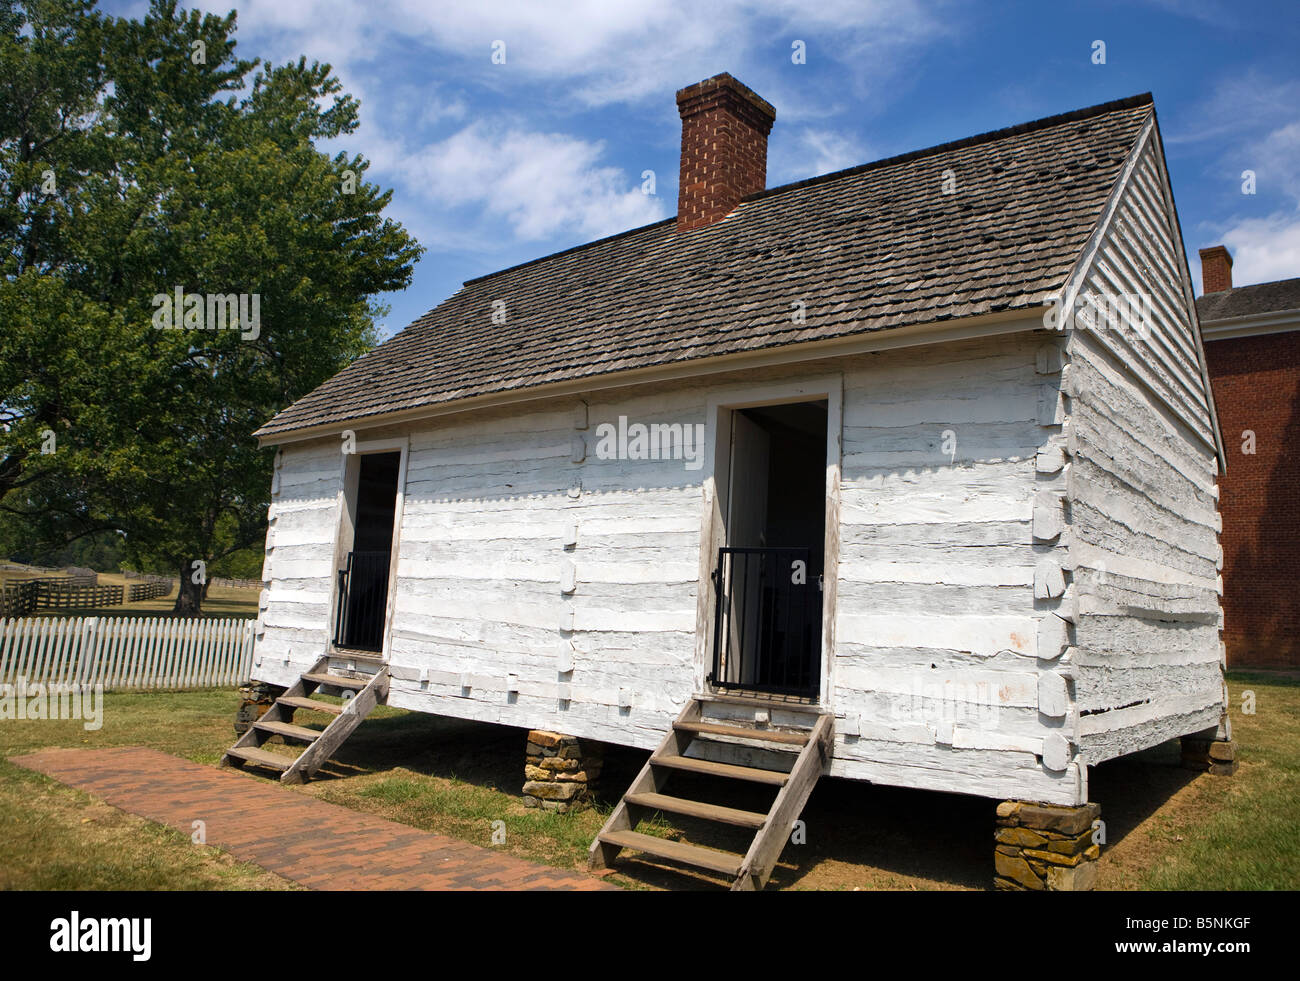 Slave quarters located adjacent to the McLean House, Appomattox Court House National Historical Park, Appomattox, Virginia. Stock Photo